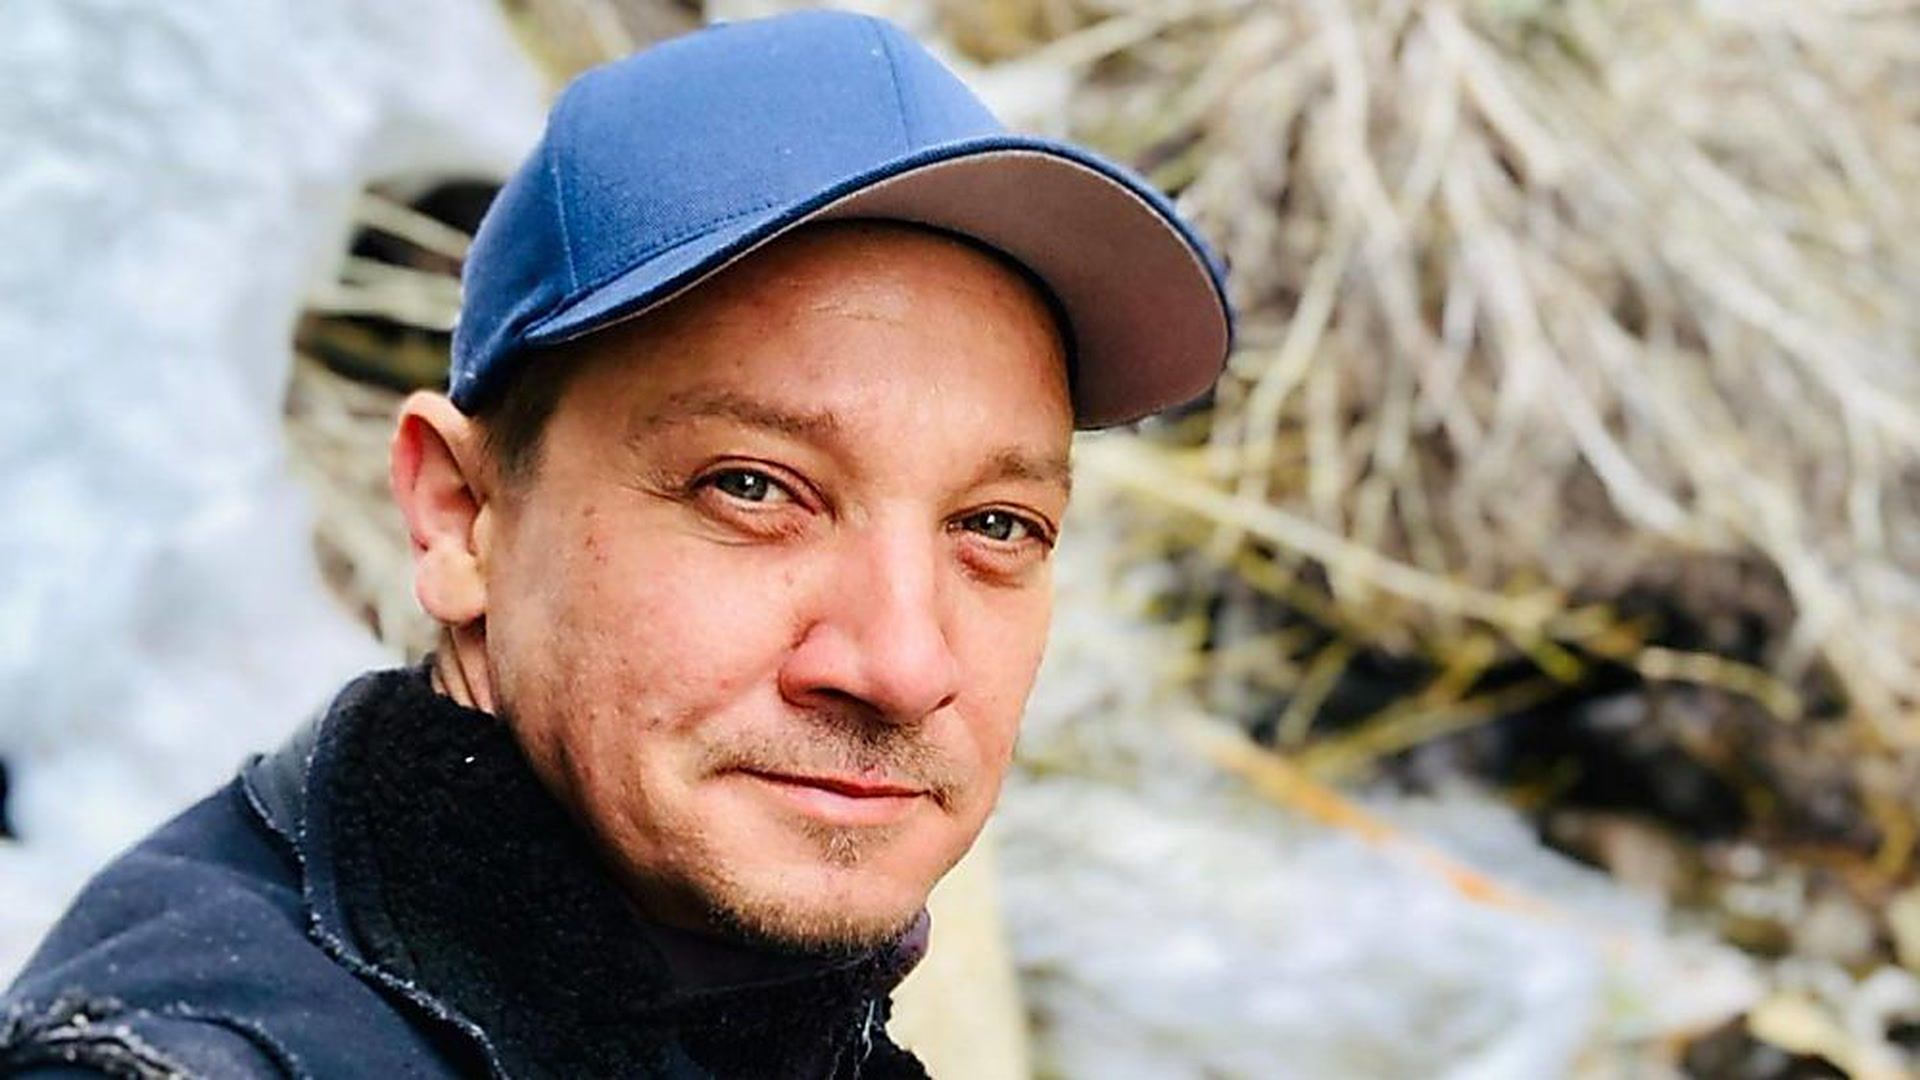 Jeremy Renner's health update: How he is doing now